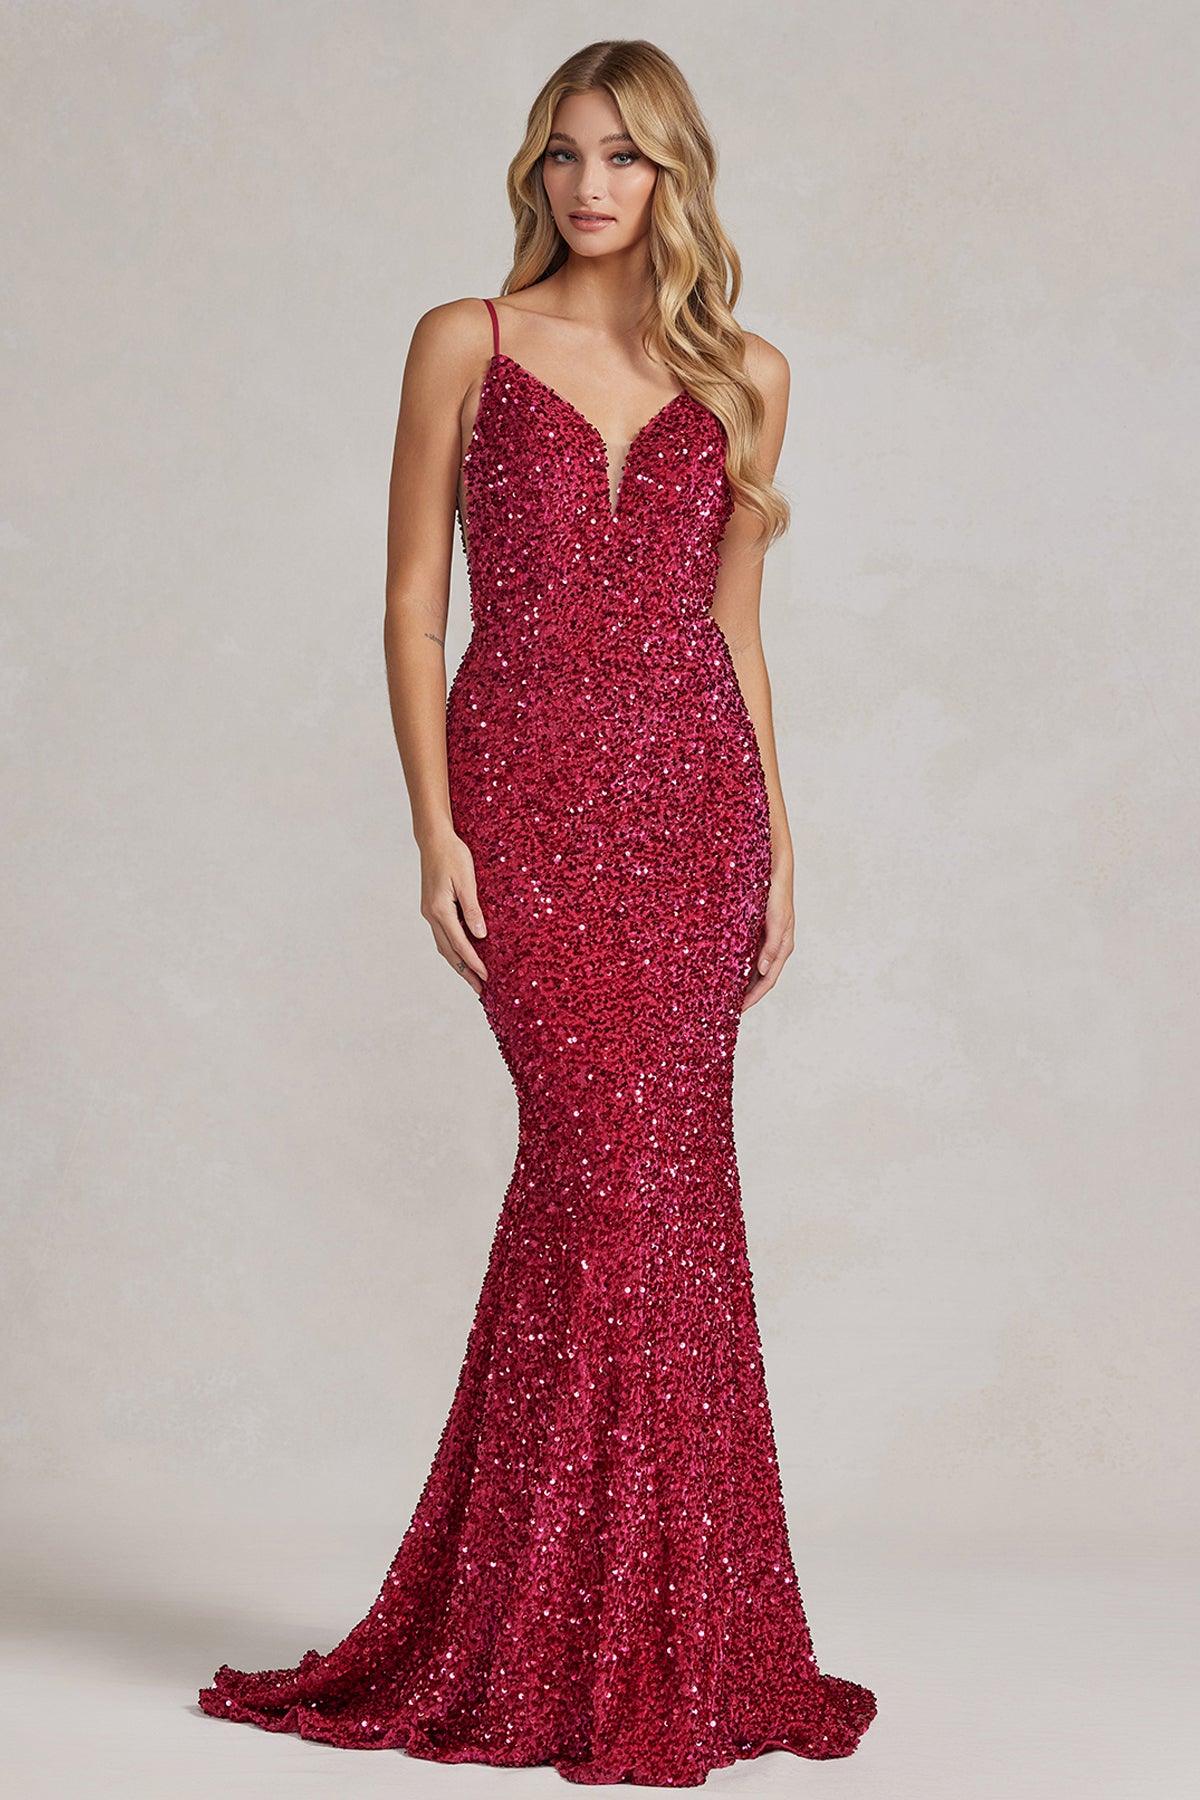 Nox Anabel R1071 Prom Long Formal Fitted Dress | The Dress Outlet